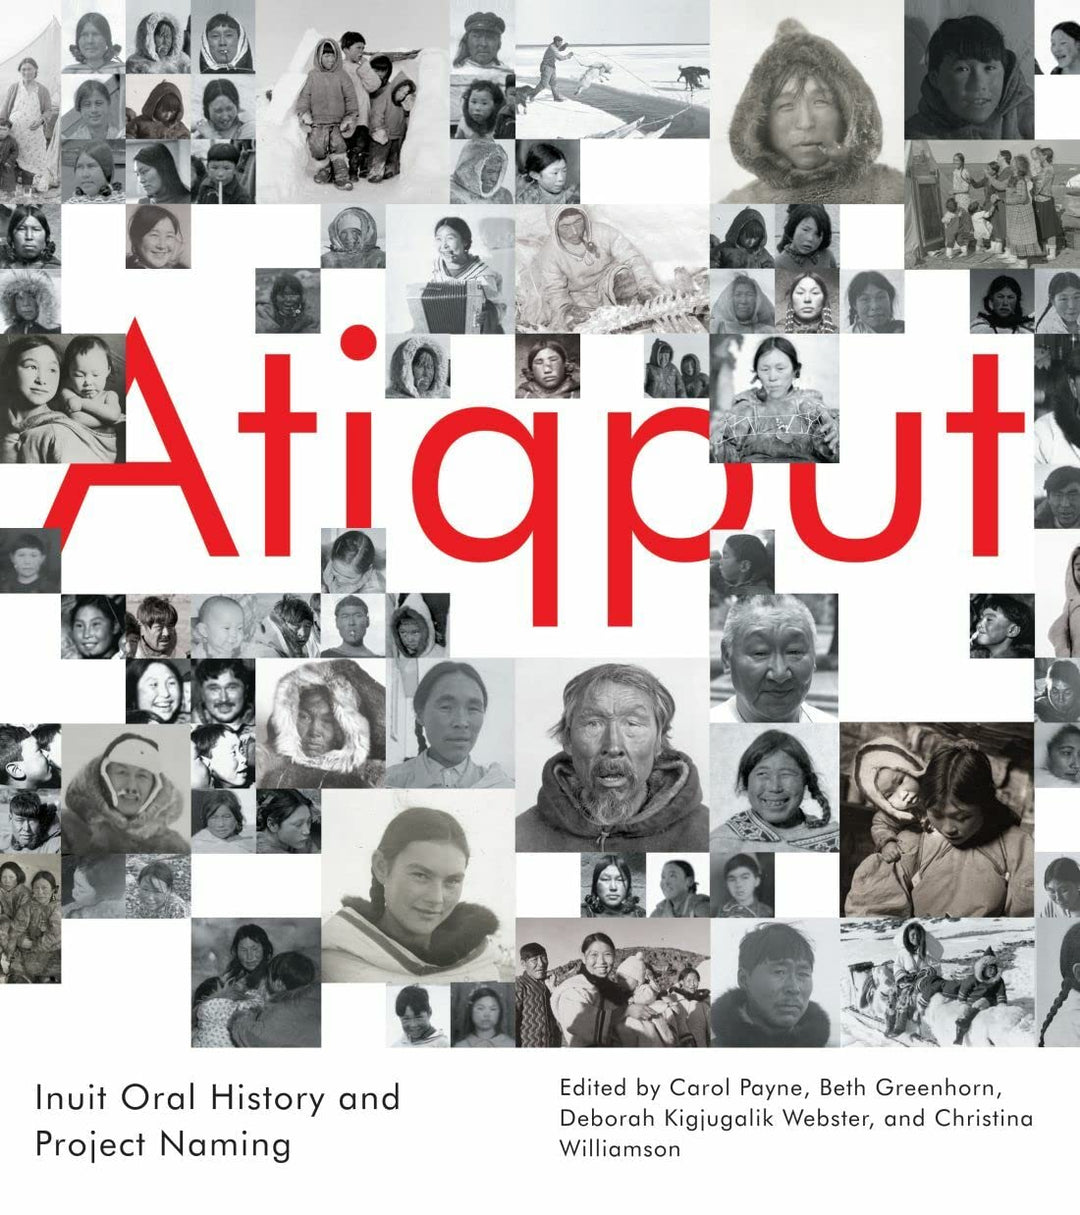 Atiqput: Inuit Oral History and Project Naming edited by Carol Payne et al.